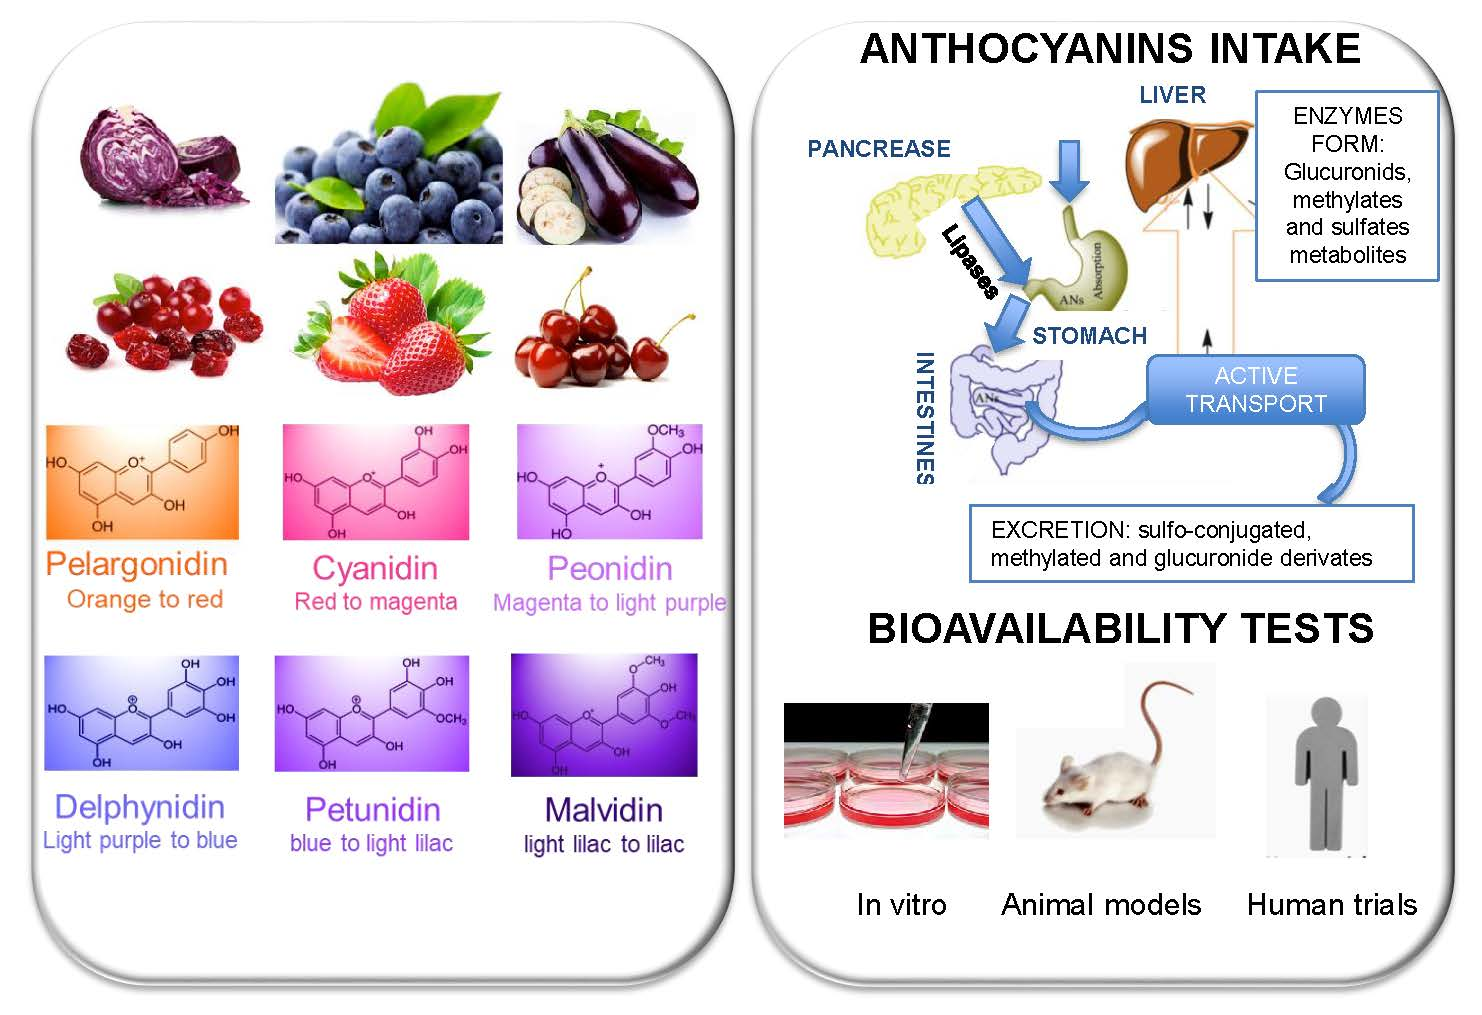 Anthocyanins and antioxidant activity